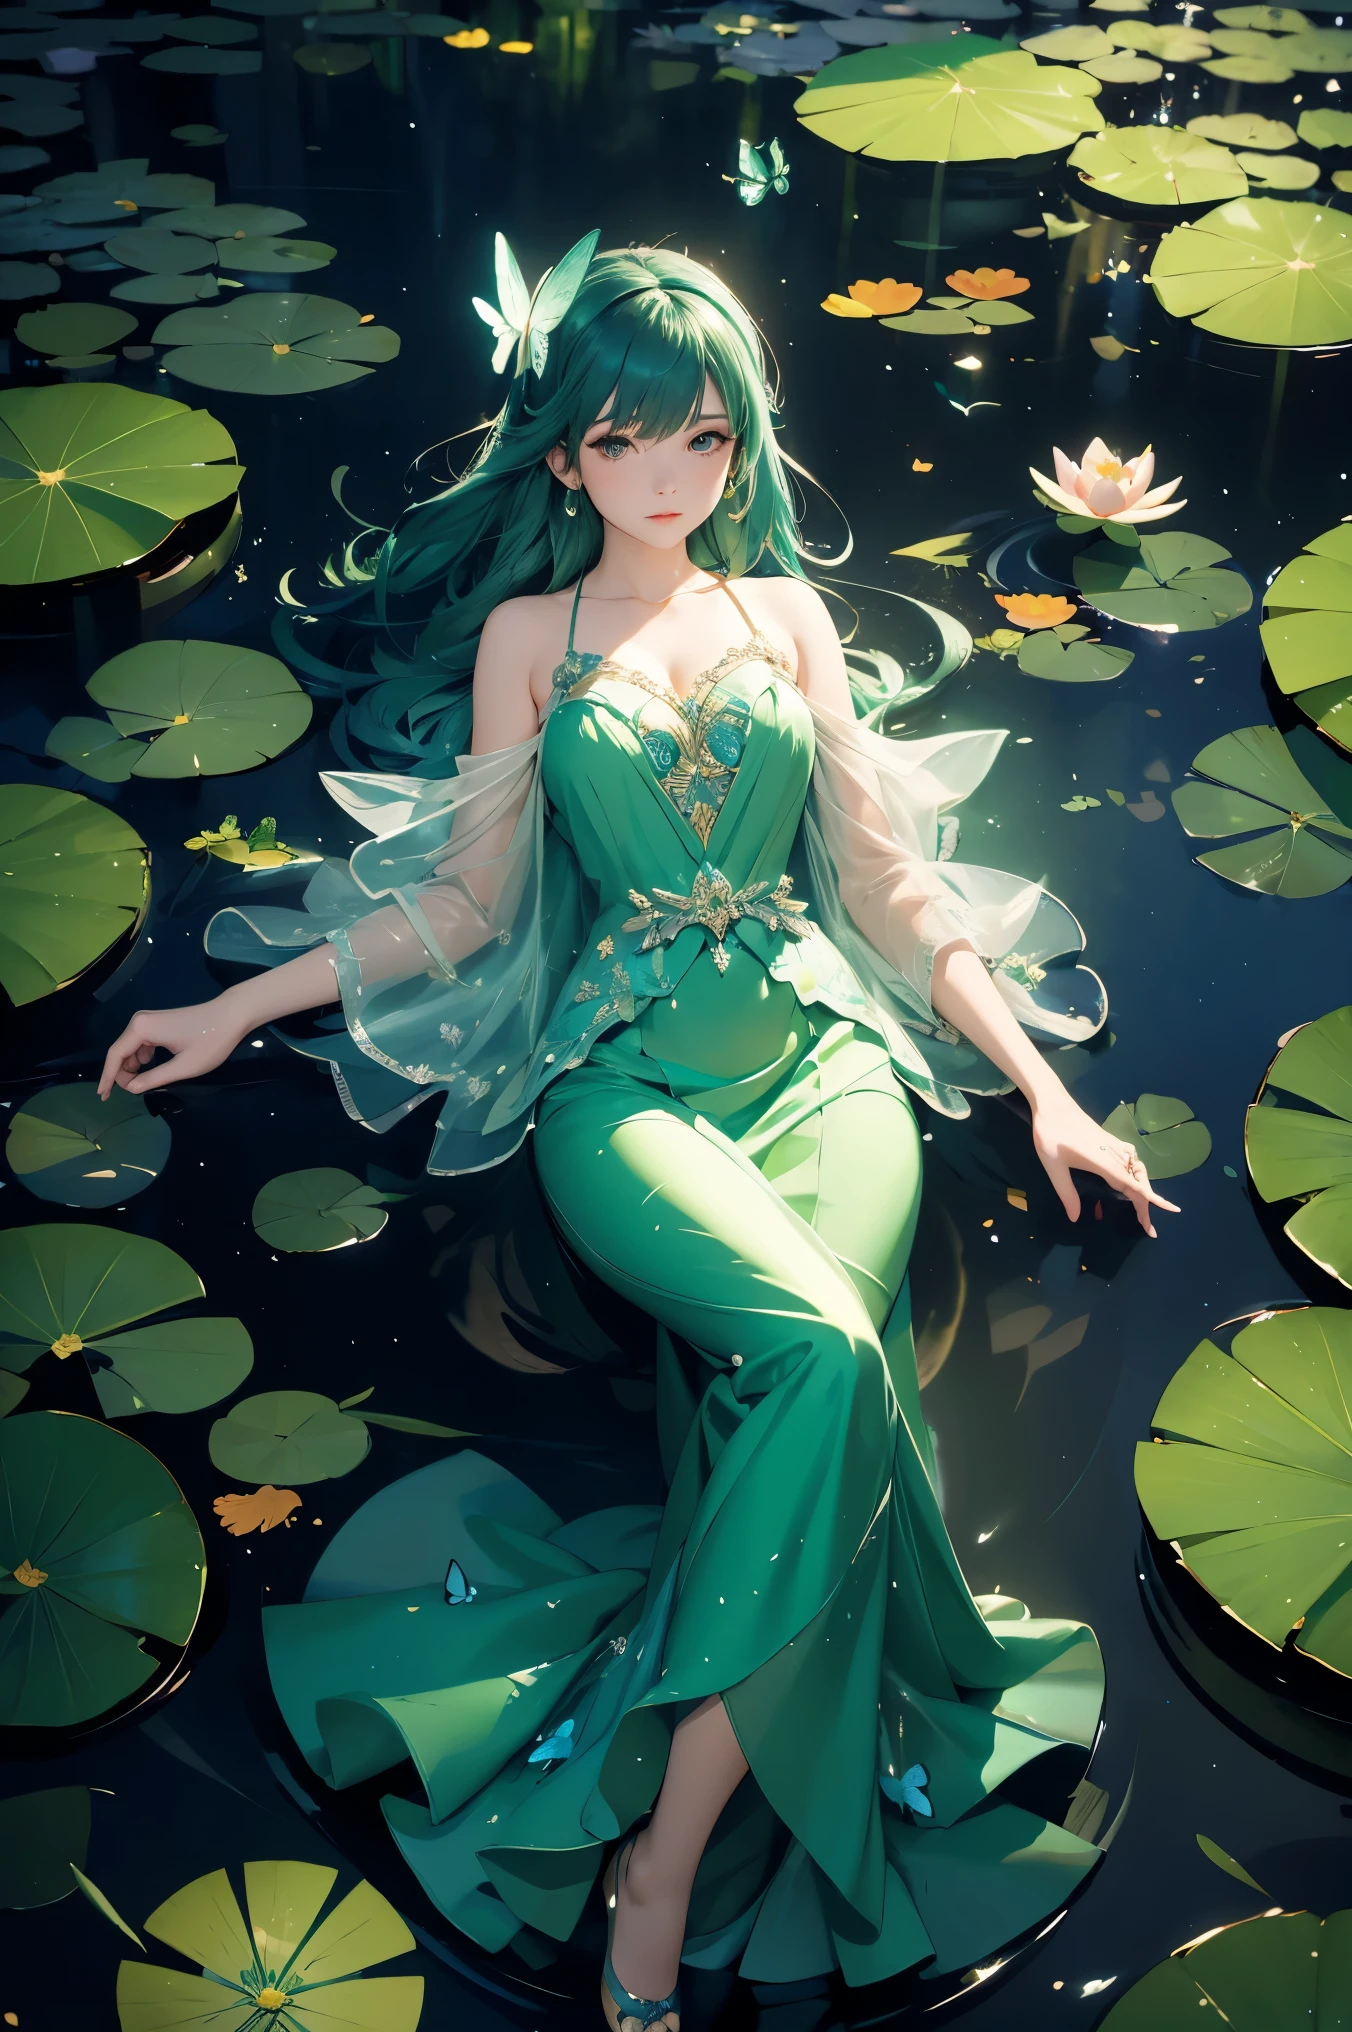 (Green dress), (Lotus pond), (Water lily pad), (Lotus: 1.3), (Butterfly: 1.4), (Paper fan), (Floating leaves), (Wind), (Sleeping), (Transparent water: 1.1), (Moonlight: 1.3, perfectly matching the surrounding scenery. On a beautiful night, the moonlight shines on the water surface, creating a calm atmosphere. From above, viewers can see the water lilies and lotus flowers around her, and there is a mysterious light underwater that illuminates the elegant swimming fish around her. Many blue butterflies dance around the girl, and the green theme dominates the entire scene. The jade and its color scheme highlight the natural beauty of the pond. The murmuring water and moonlight add a peaceful mood, making it a perfect place for relaxation and reflection,